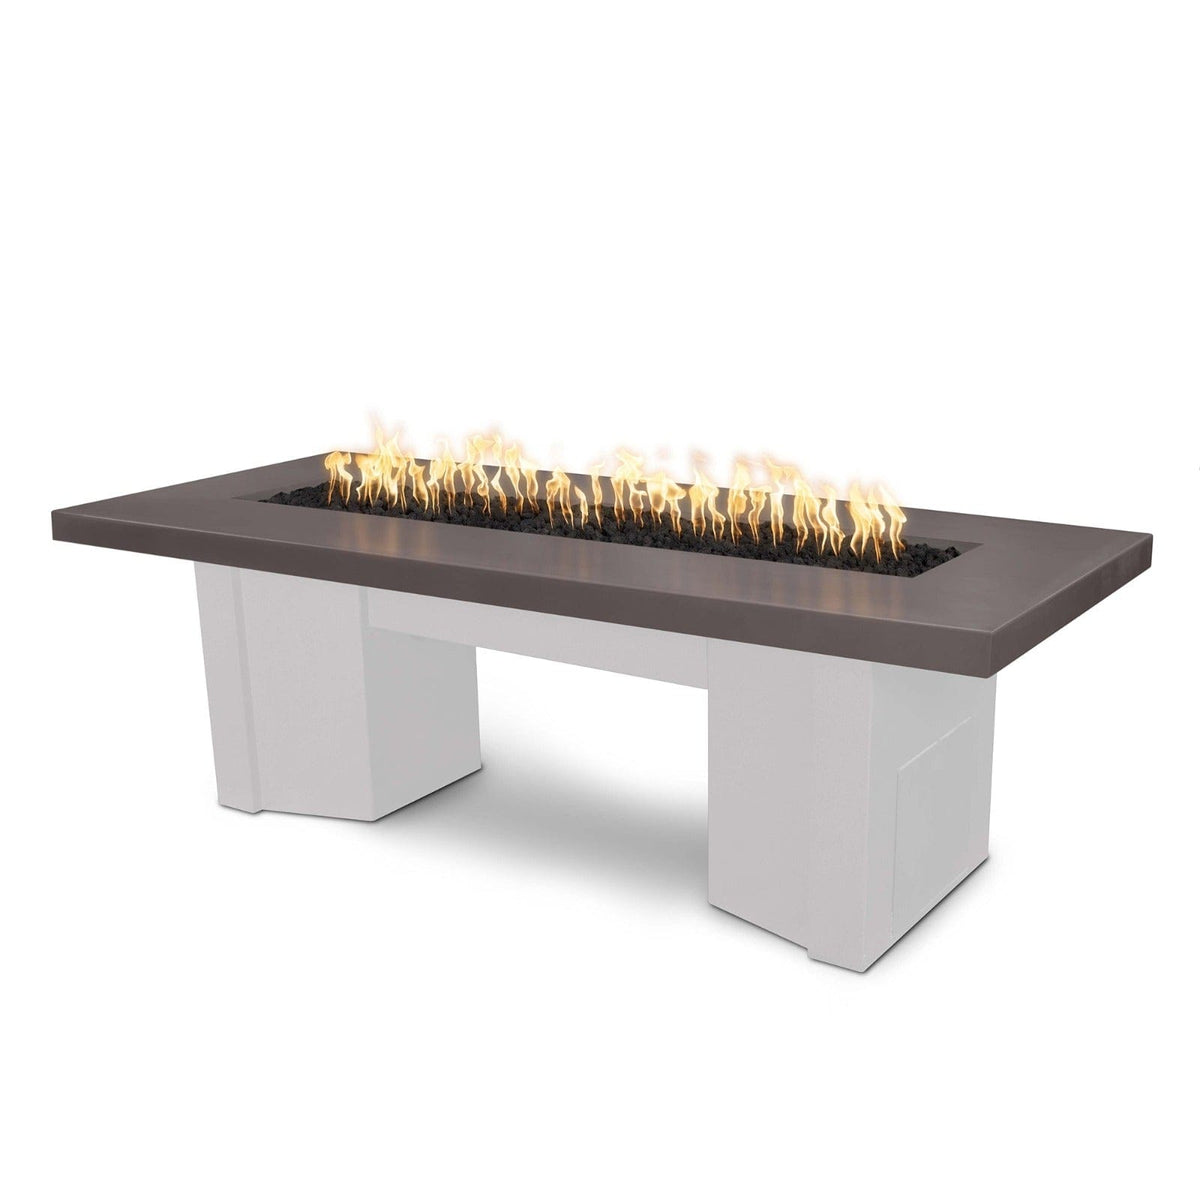 The Outdoor Plus Fire Features Chestnut (-CST) / White Powder Coated Steel (-WHT) The Outdoor Plus 78&quot; Alameda Fire Table Smooth Concrete in Liquid Propane - Flame Sense System with Push Button Spark Igniter / OPT-ALMGFRC78FSEN-LP